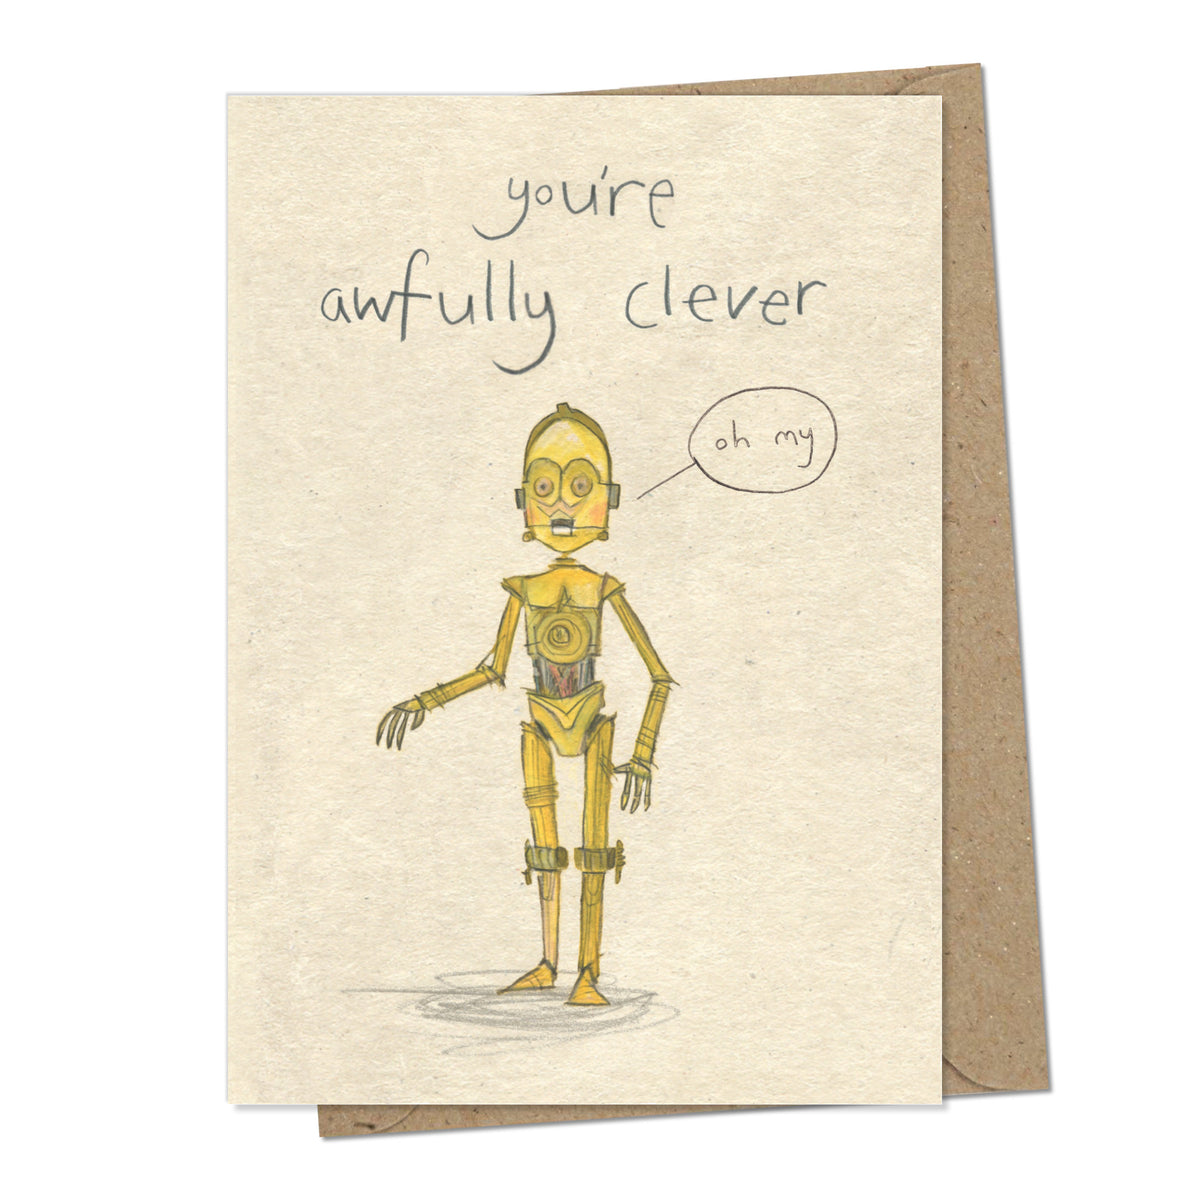 A greetings card with a beige mottled background with handwriting above an illustration stating &#39;you&#39;re awfully clever&#39;. The illustration is of R2D2 from the movie Star Wars. It is a a gold robot looking surprised with the speech bubble &#39;oh my&#39;.